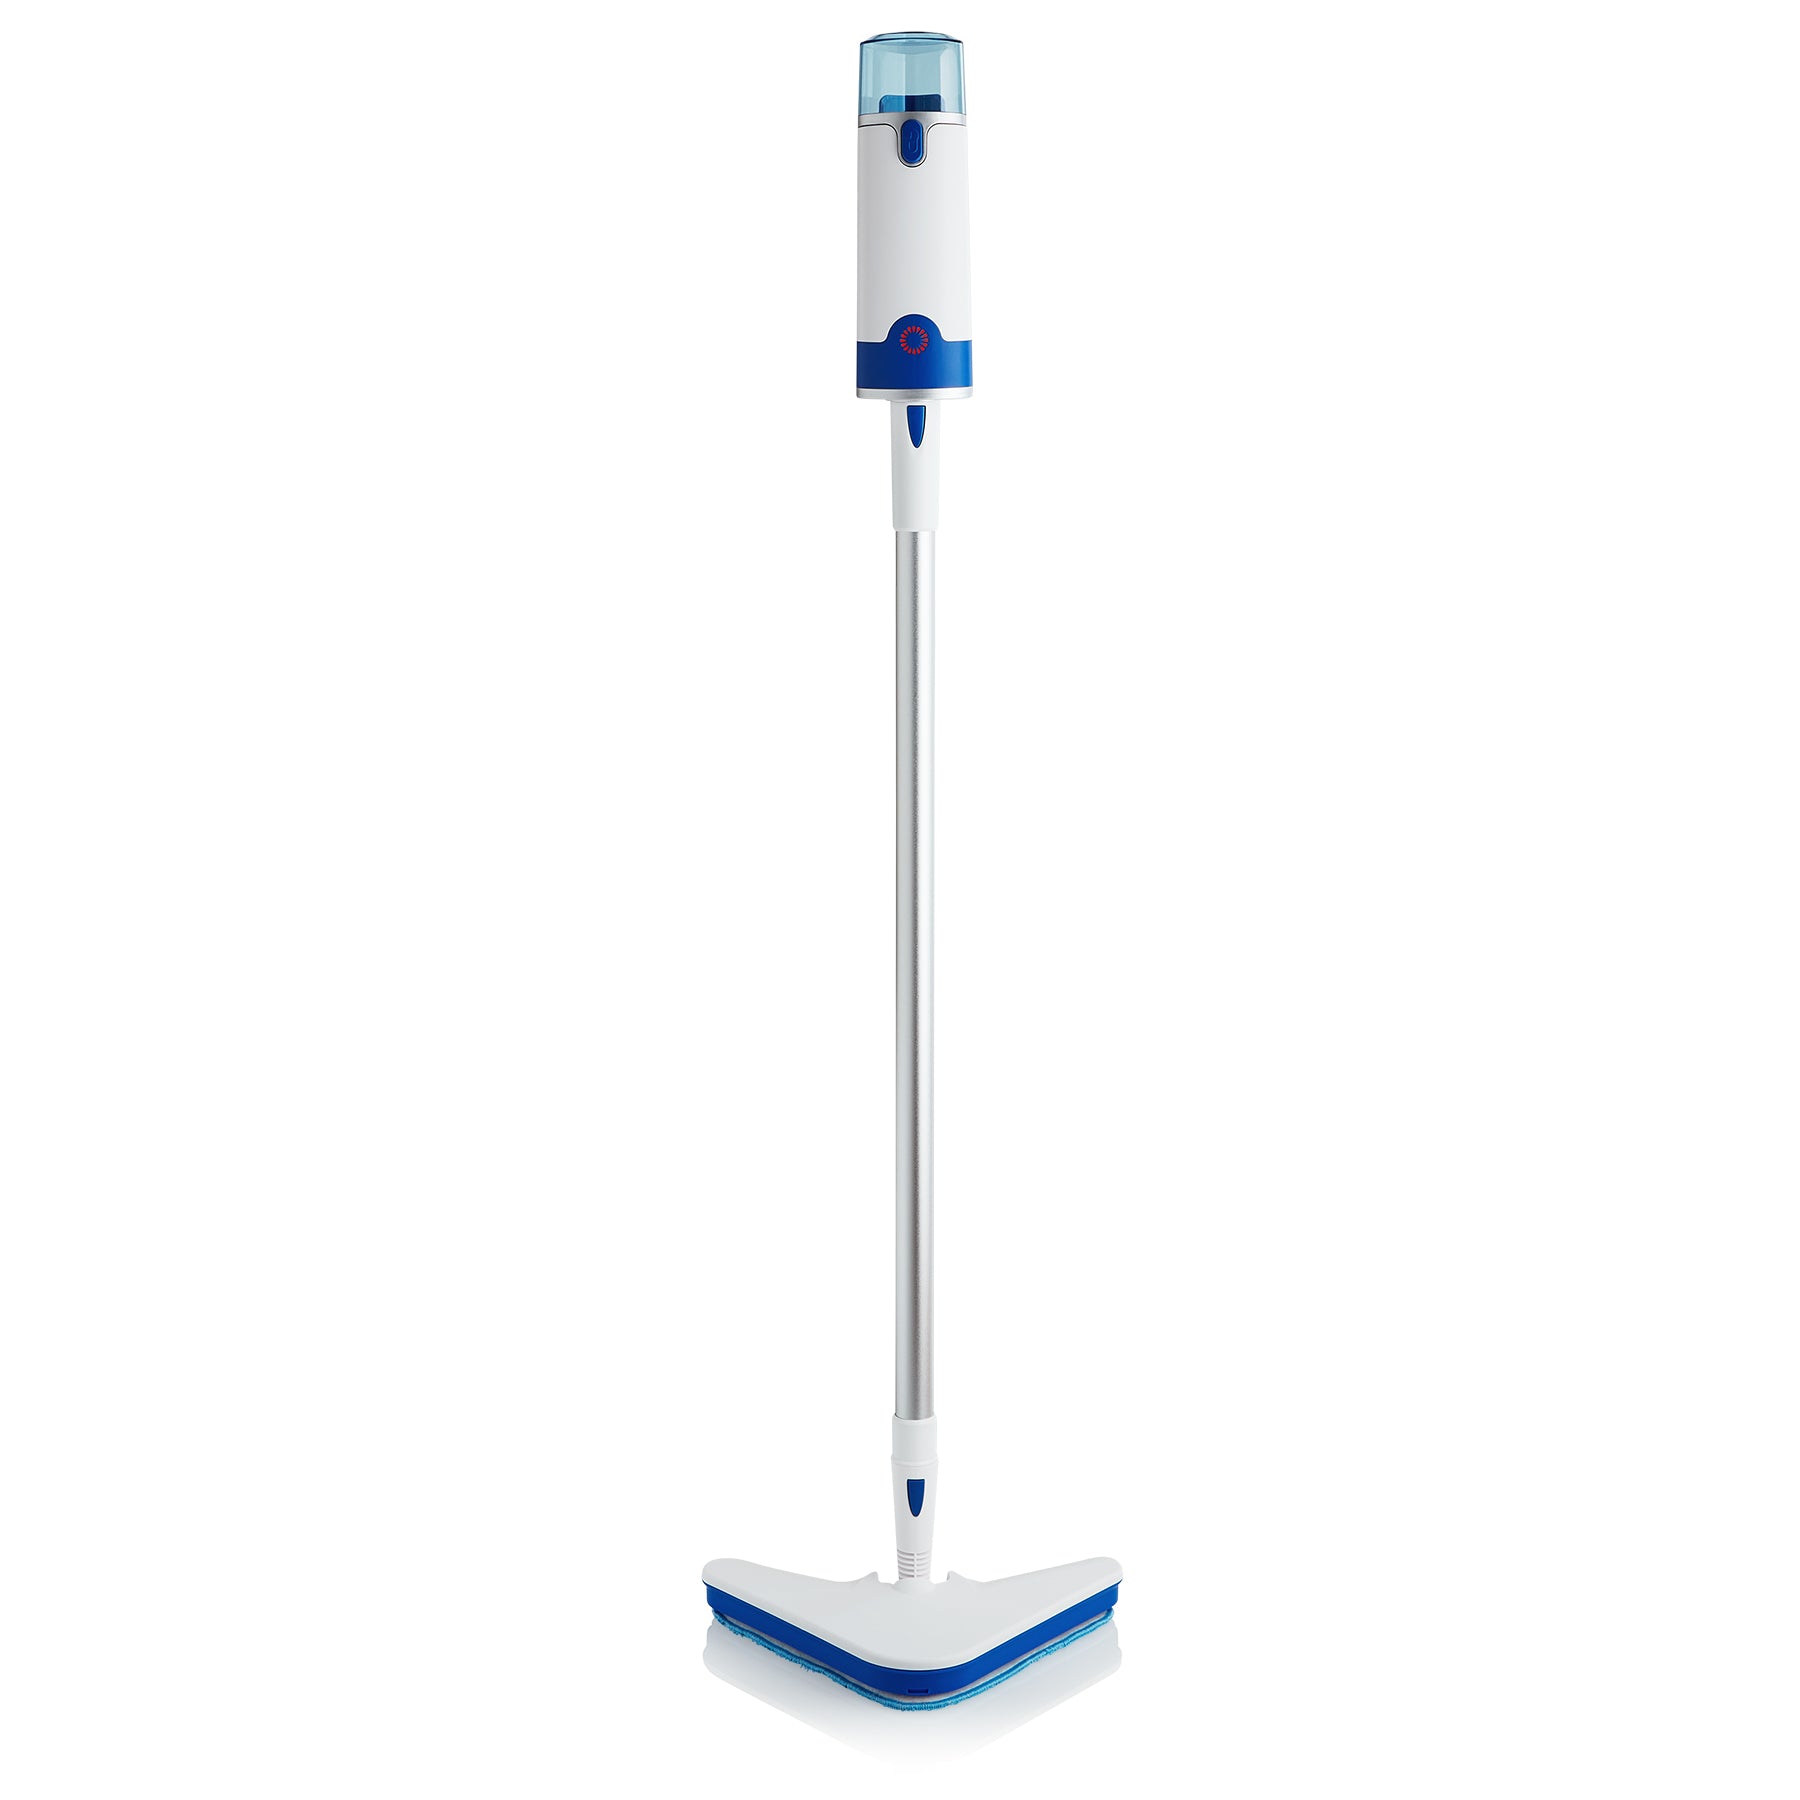 Reliable 300CS Pronto Plus 2-in-1 Steam Cleaning System